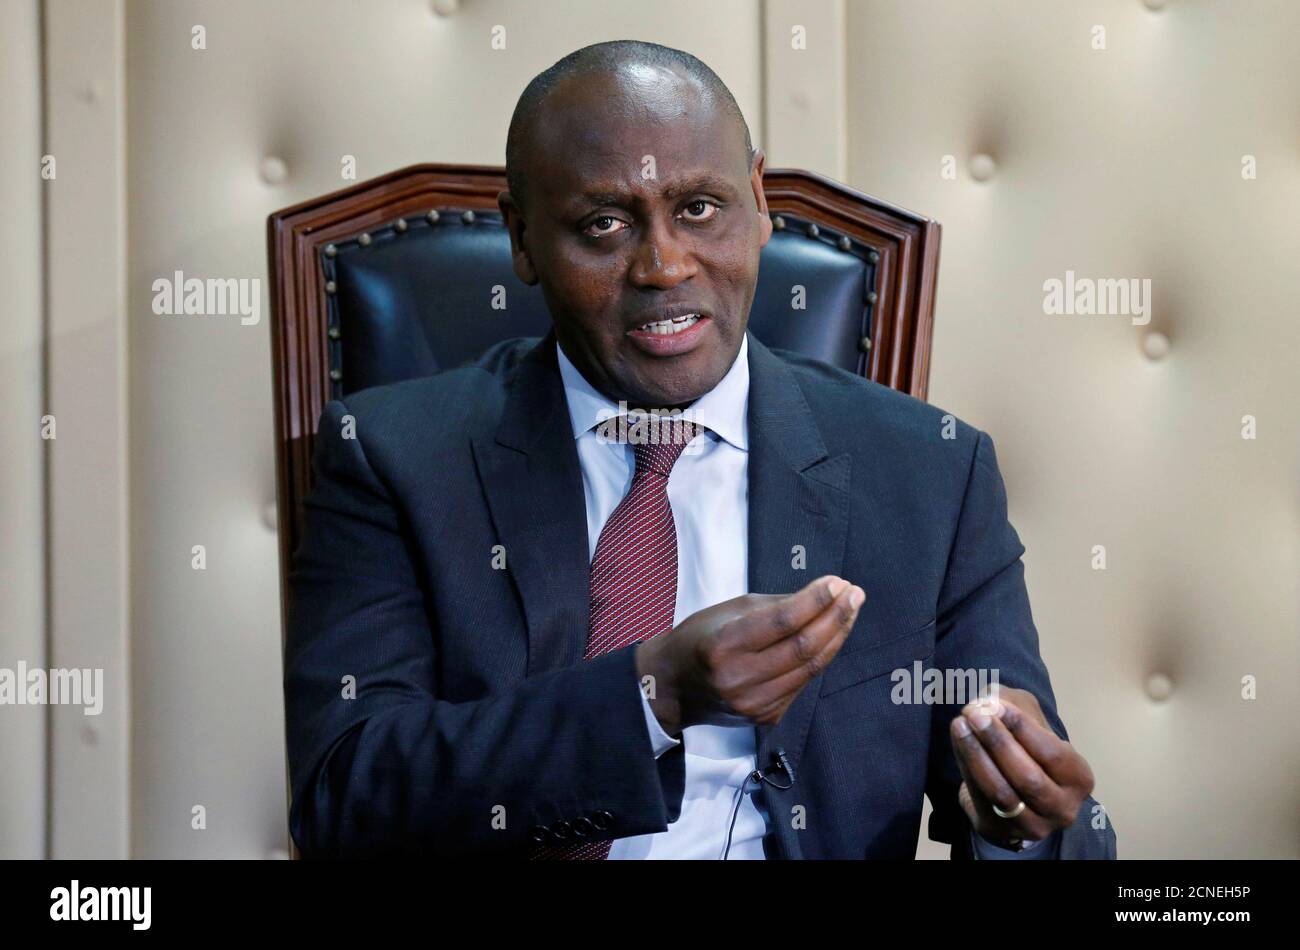 Macharia Njeru, chairman of the Independent Policing Oversight Authority (IPOA), speaks during a Reuters interview in his office in Nairobi, Kenya August 17, 2017. REUTERS/Thomas Mukoya Stock Photo